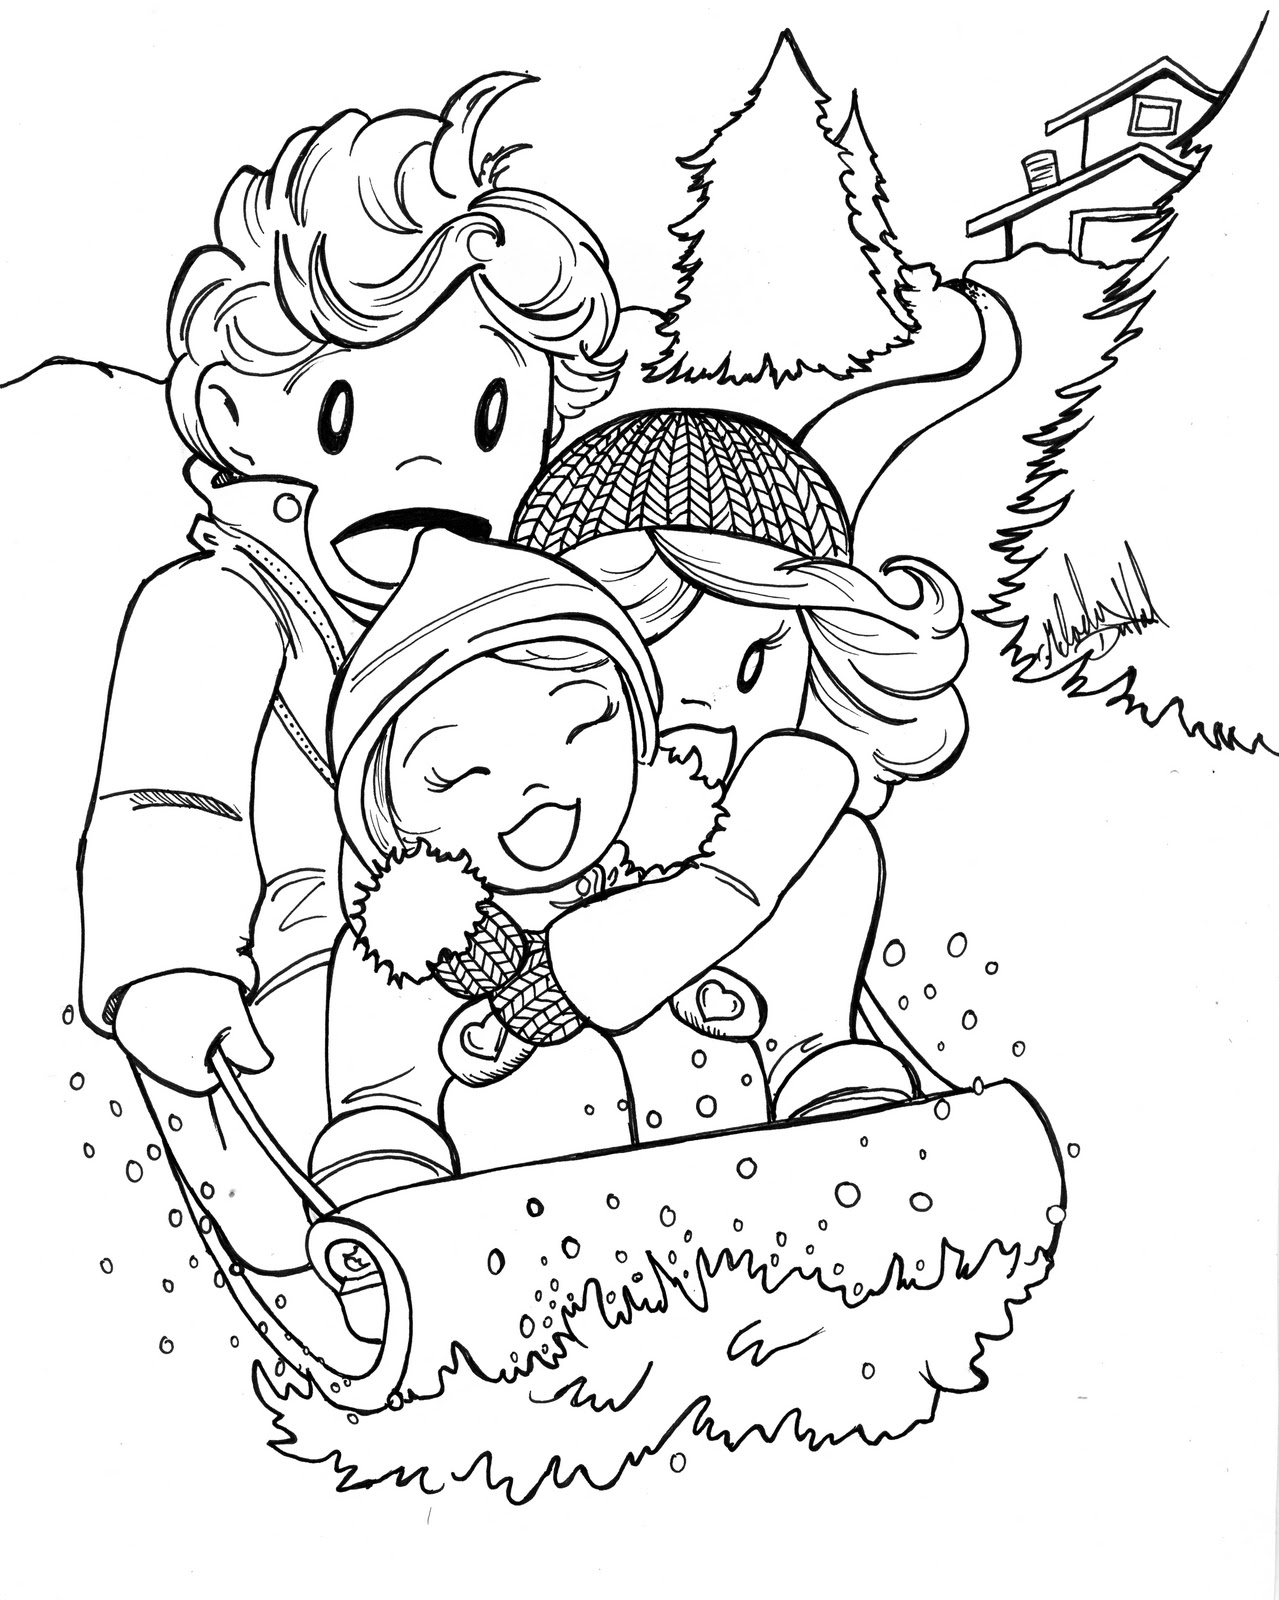 Download Winter season #164543 (Nature) - Printable coloring pages